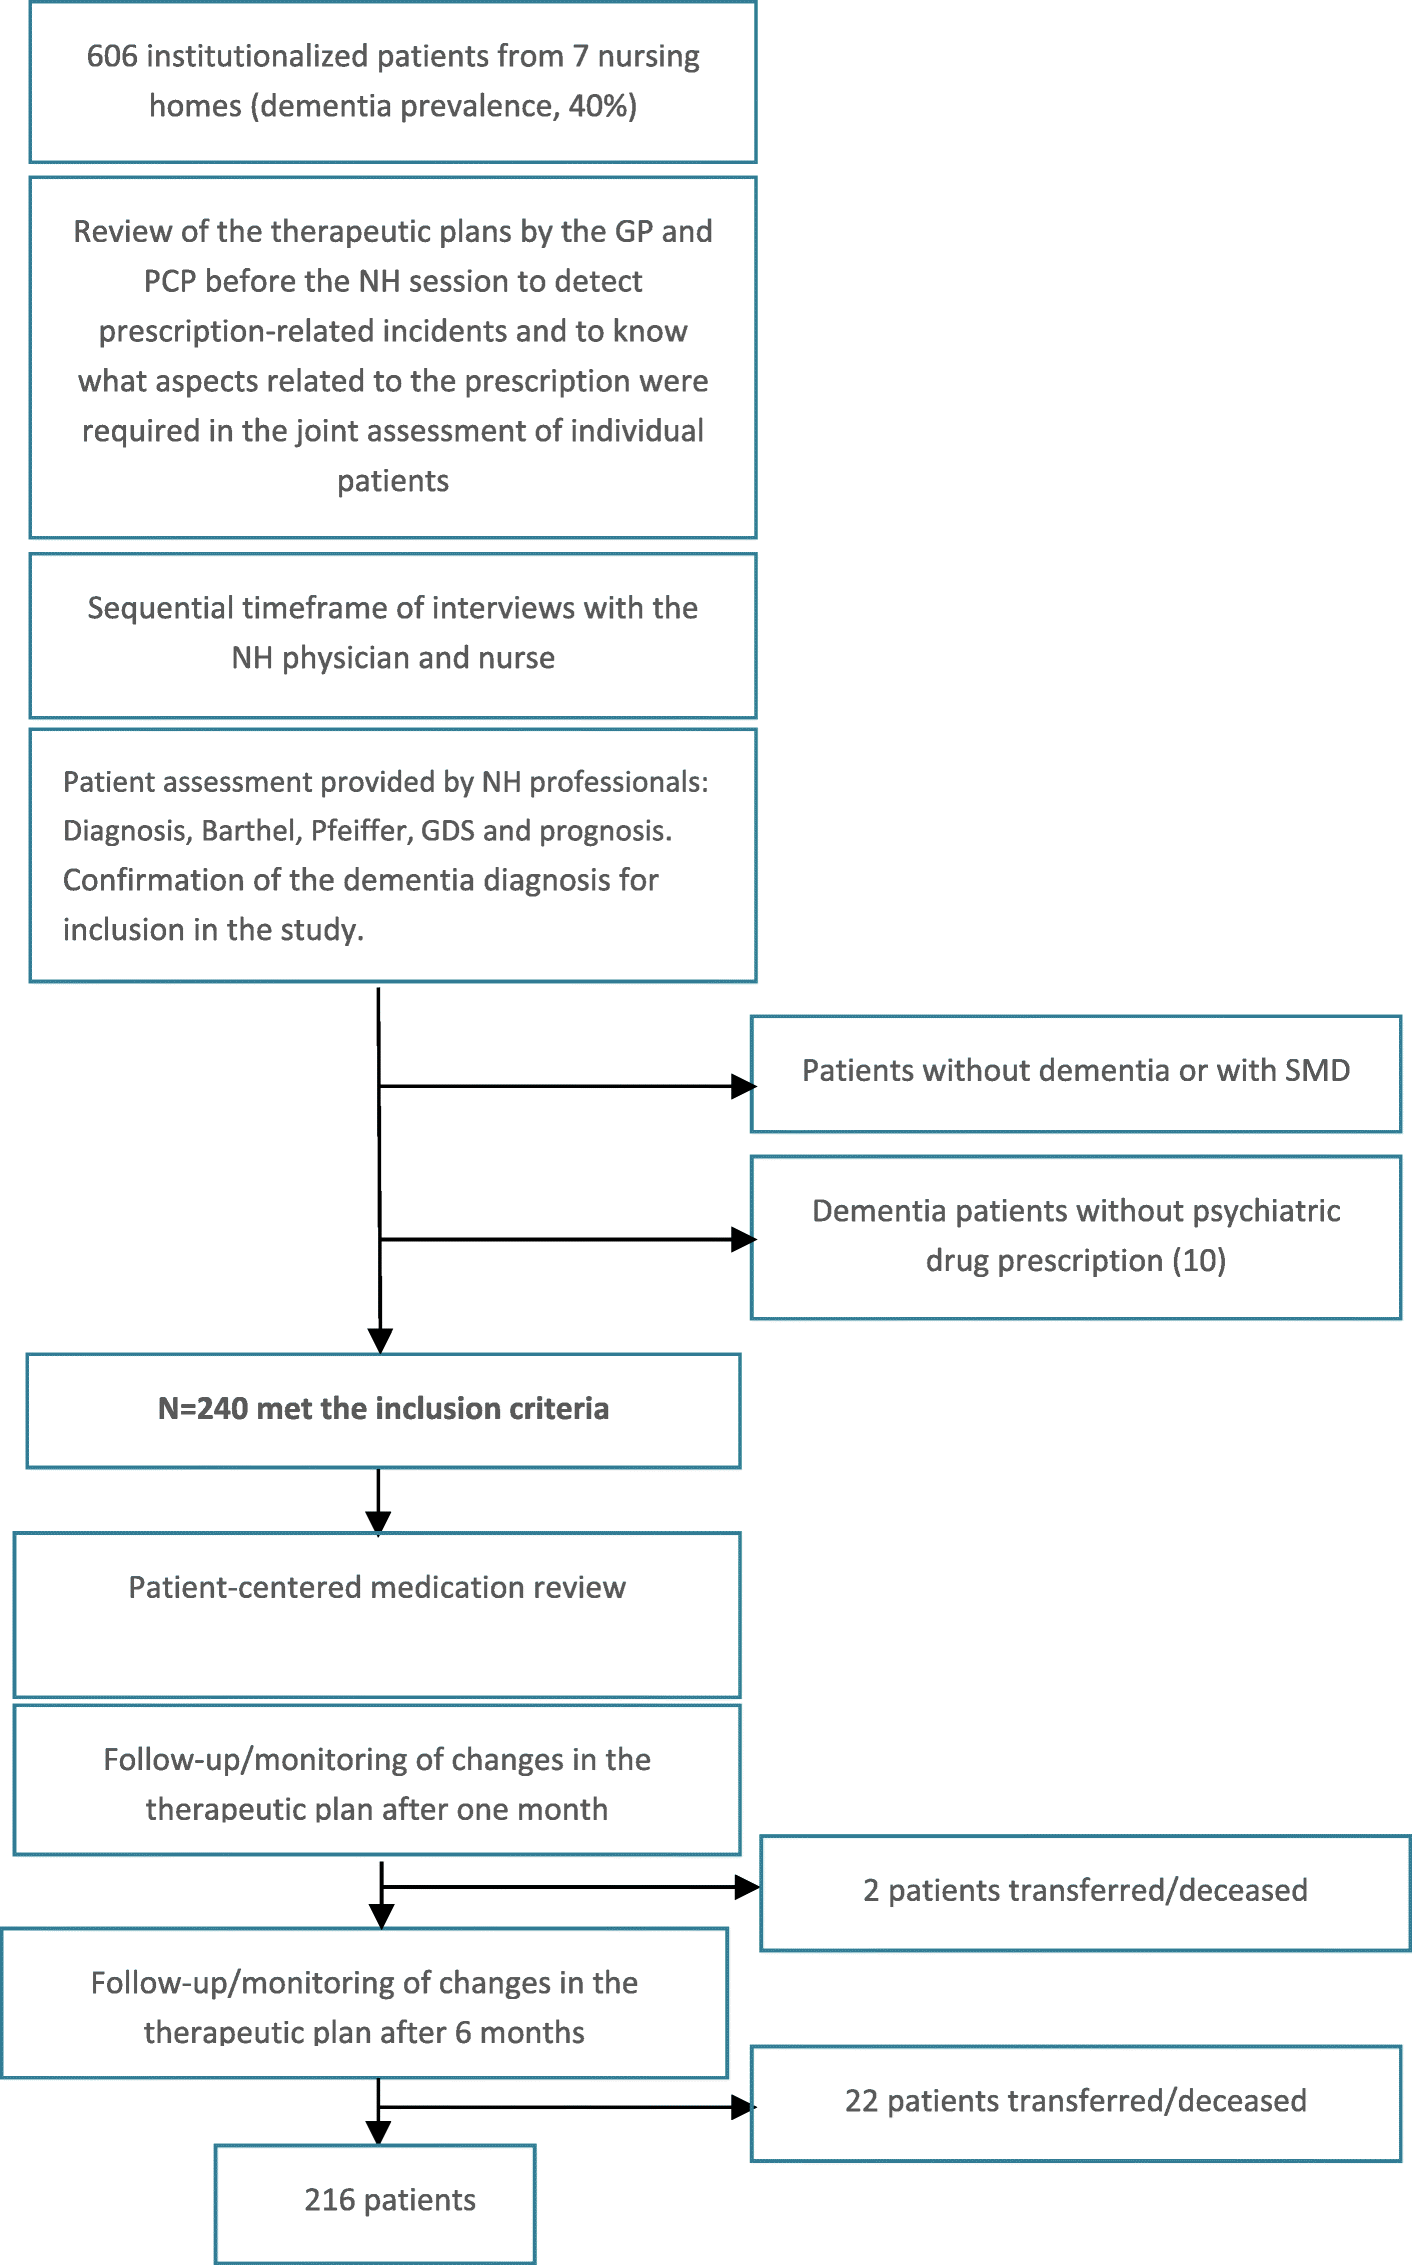 Consensus and evidence-based medication review to optimize and potentially  reduce psychotropic drug prescription in institutionalized dementia  patients | BMC Geriatrics | Full Text